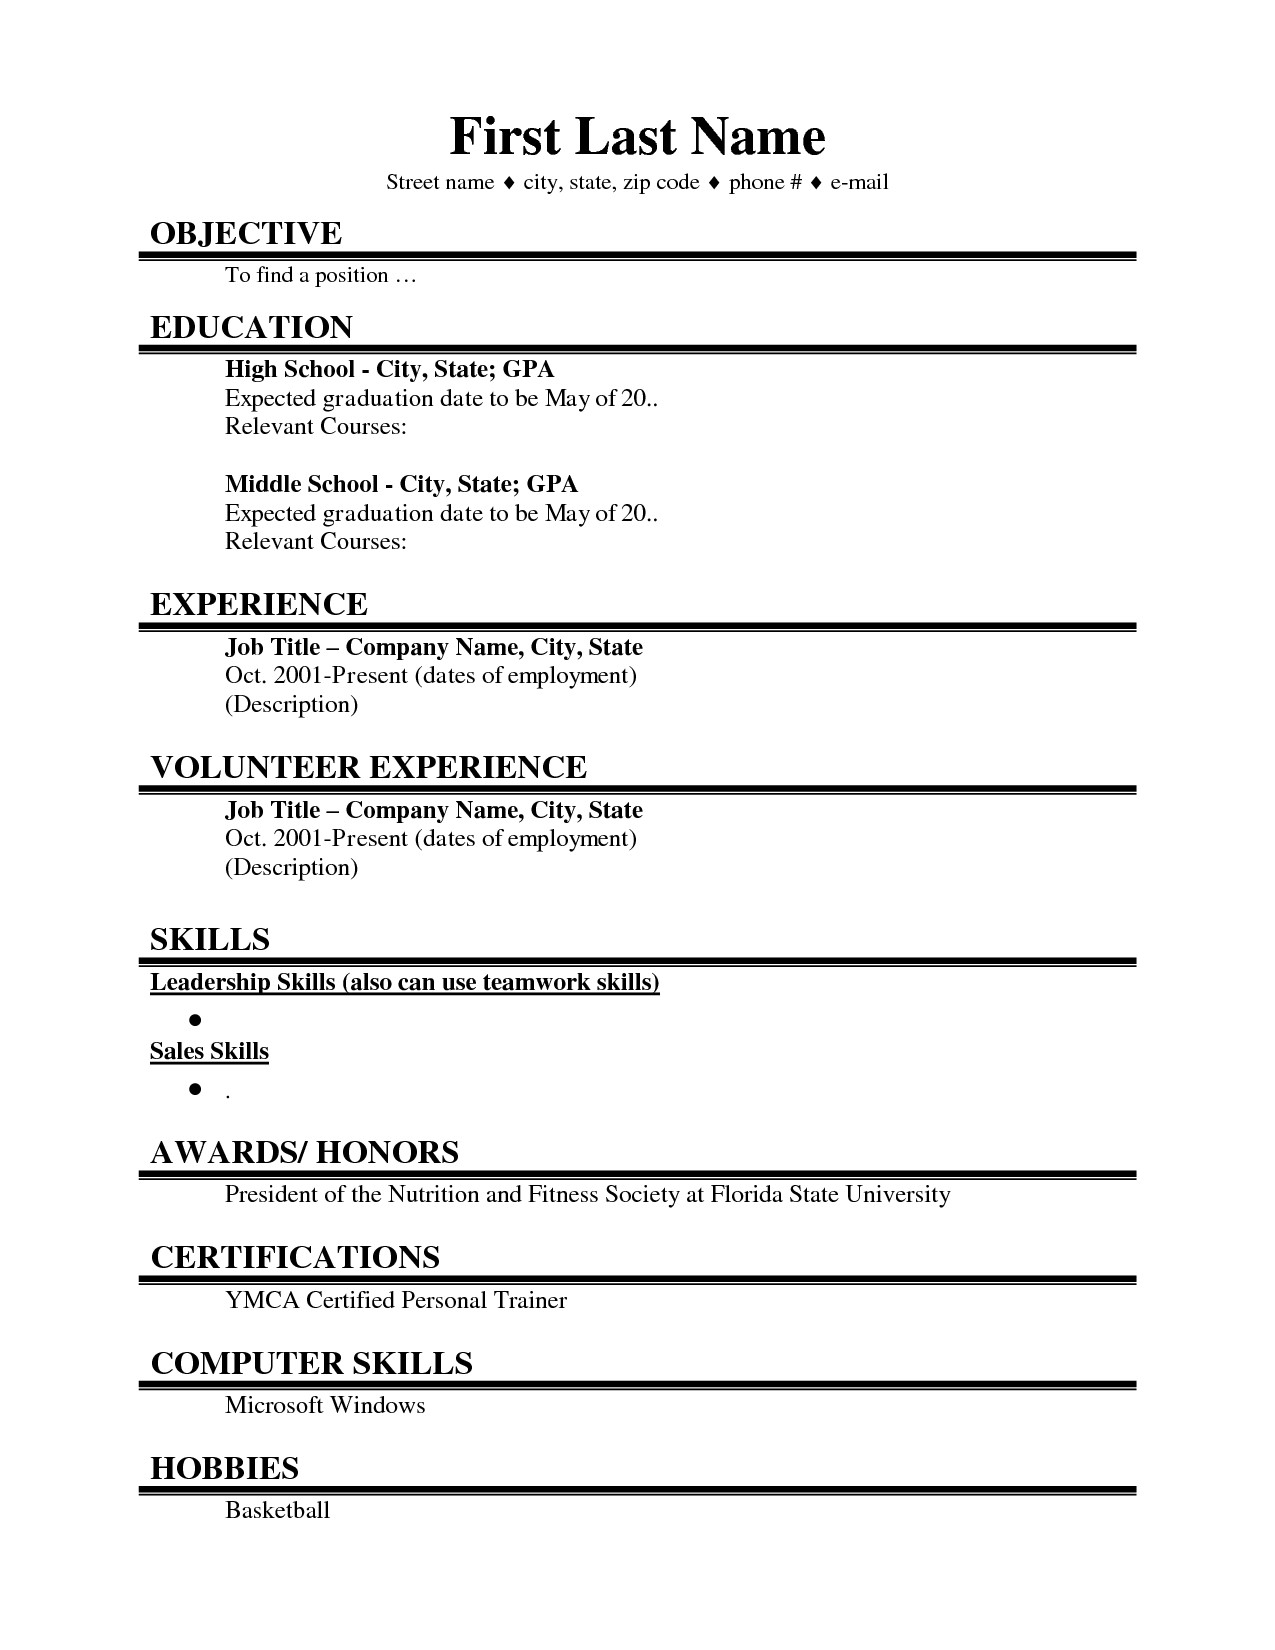 Resume Template for First Job First Job Resume Google Search Resume